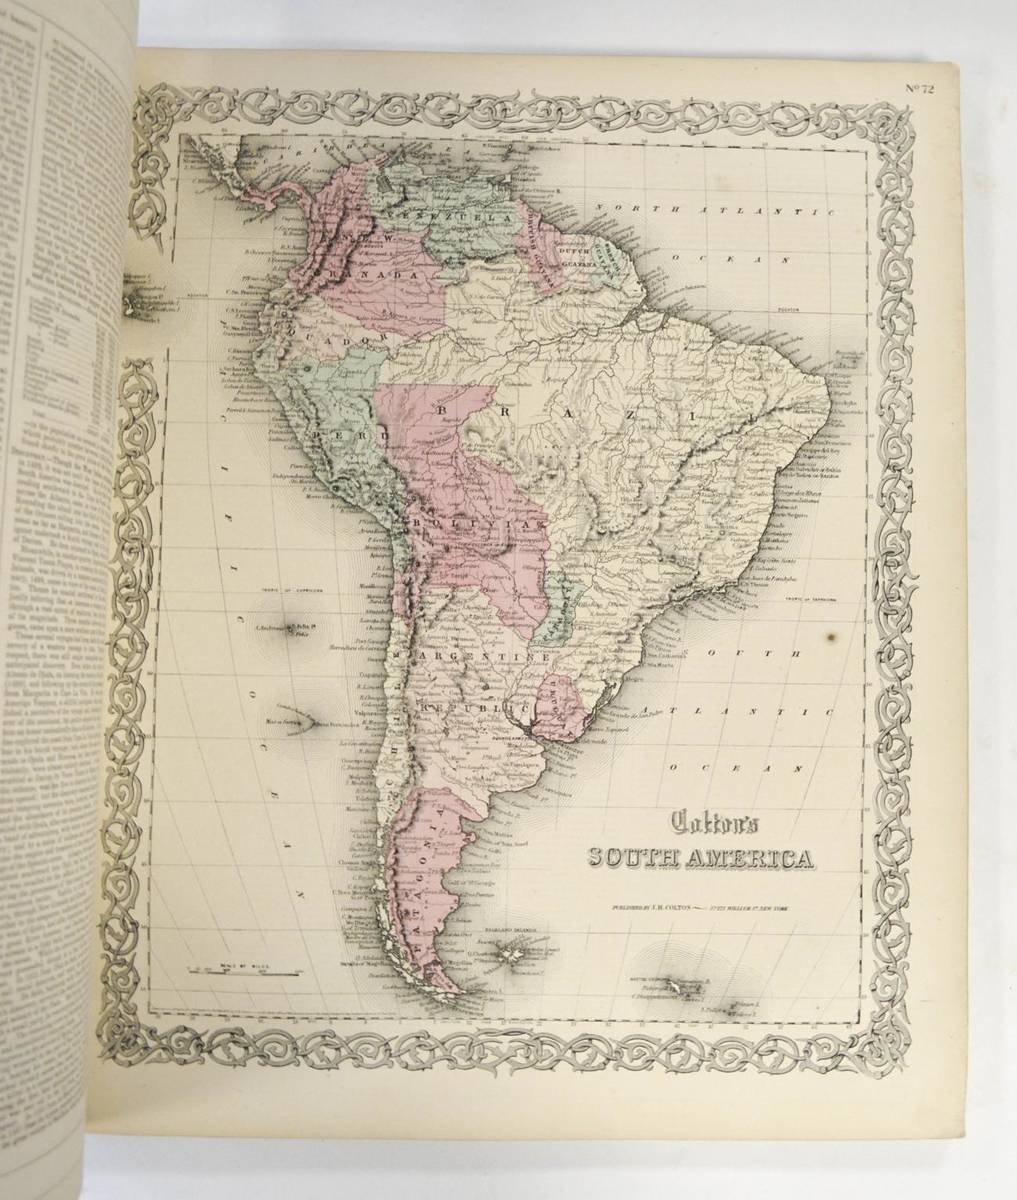 Lot 282 - Colton (G.W.) Colton's General Atlas, 1863, New York, J.H. Colton, folio, disbound, numbered as...